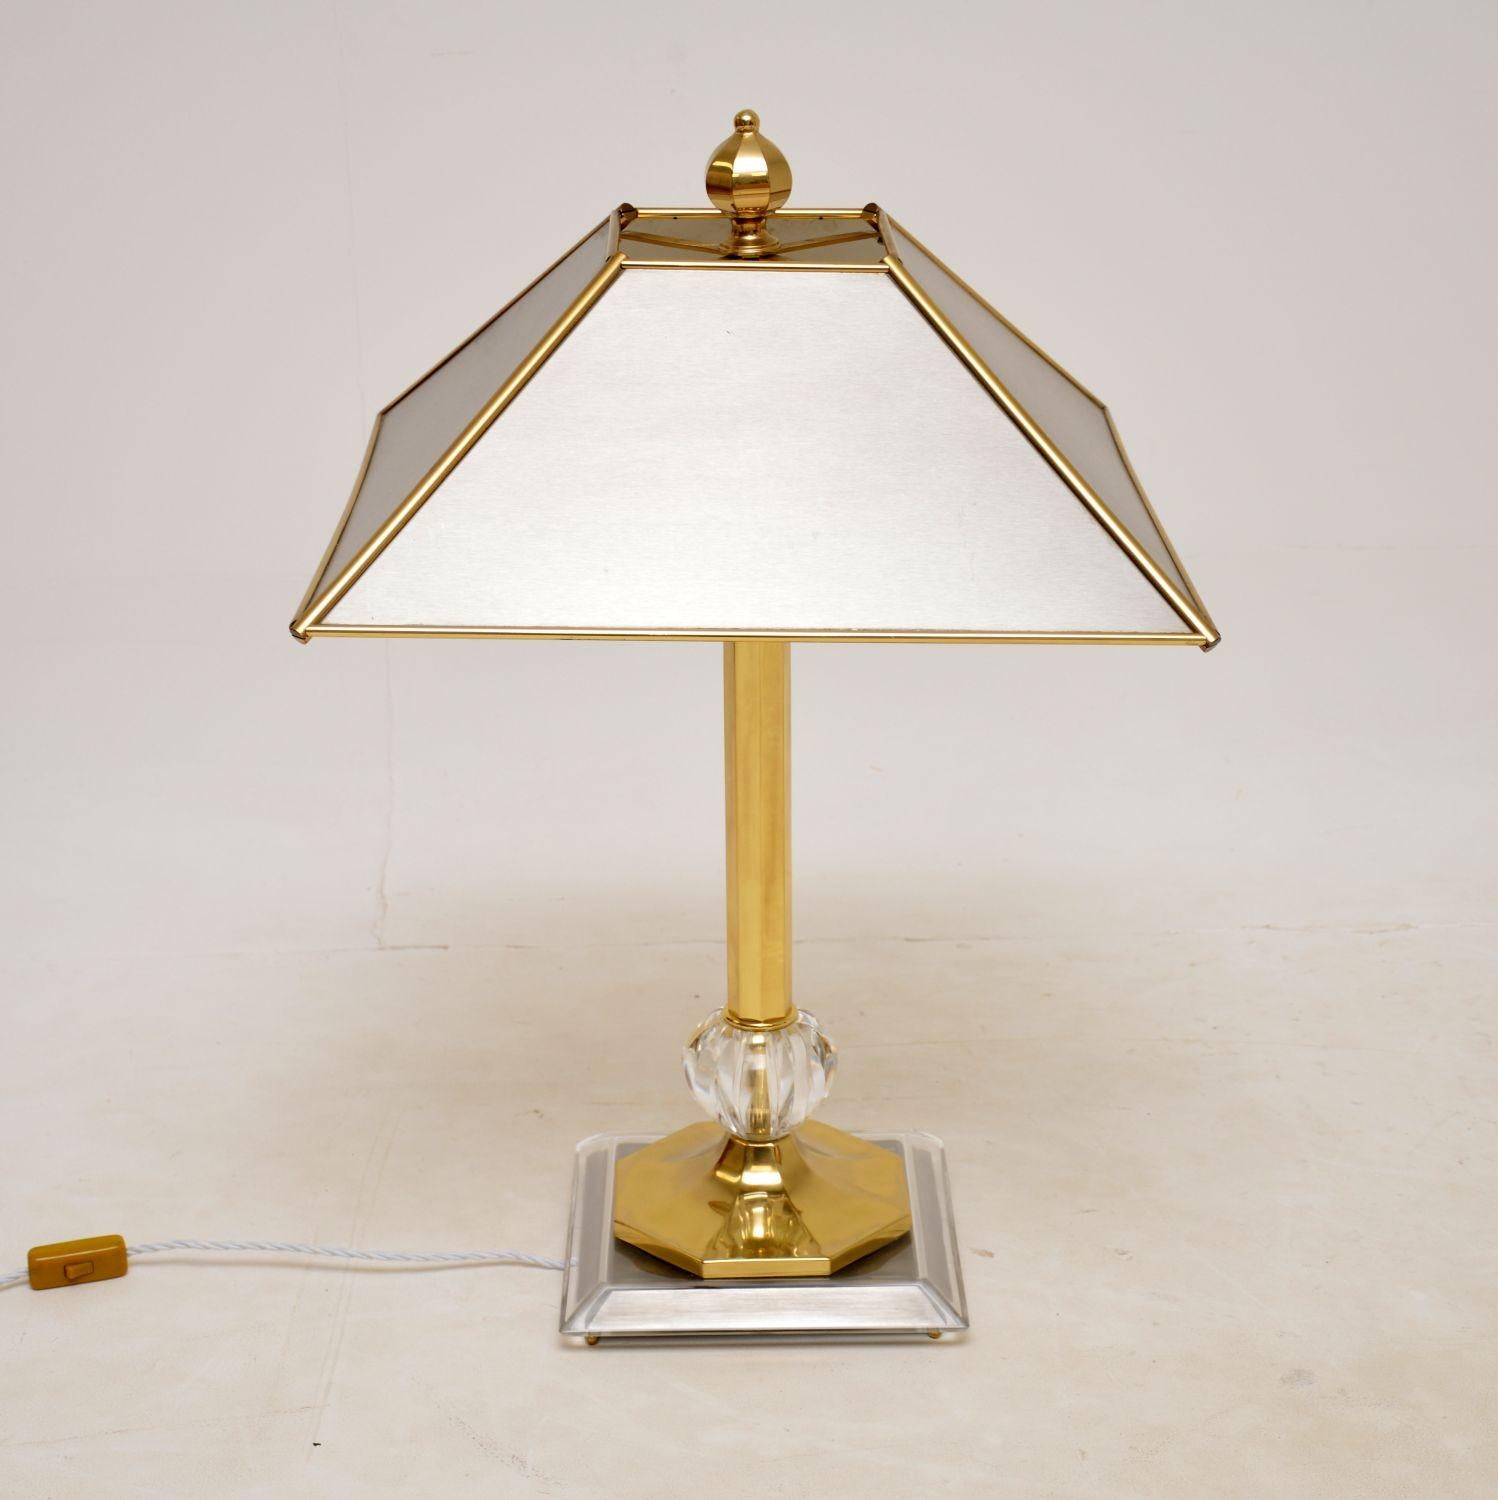 A very large and extremely impressive vintage table lamp in brass, steel and glass. This was recently imported from Italy, it dates from the 1970’s.

The quality is outstanding, this is very heavy and very well made. The large brushed steel shade is